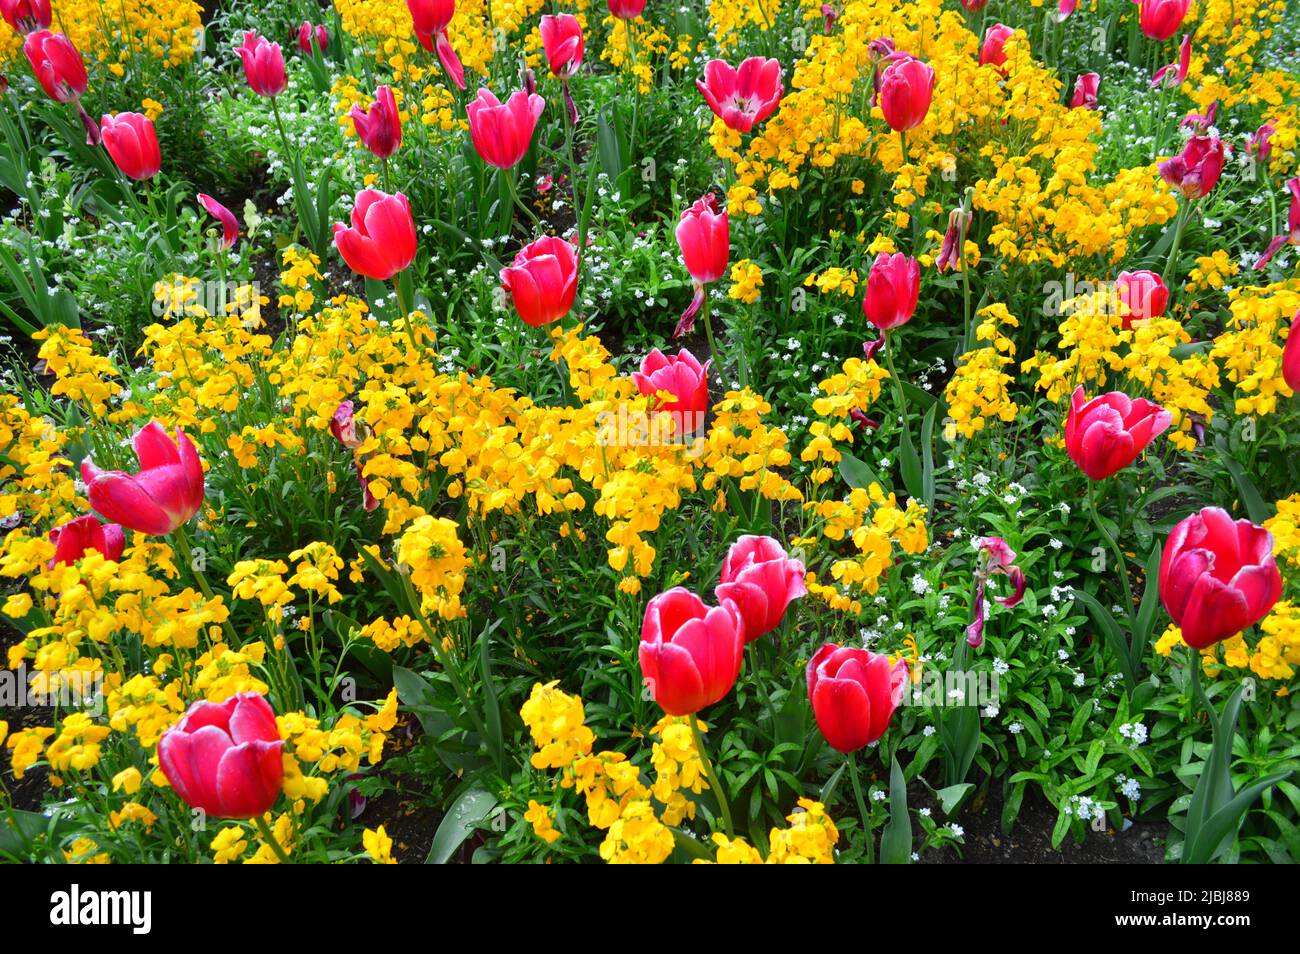 Pink tulips from a Paris garden Stock Photo